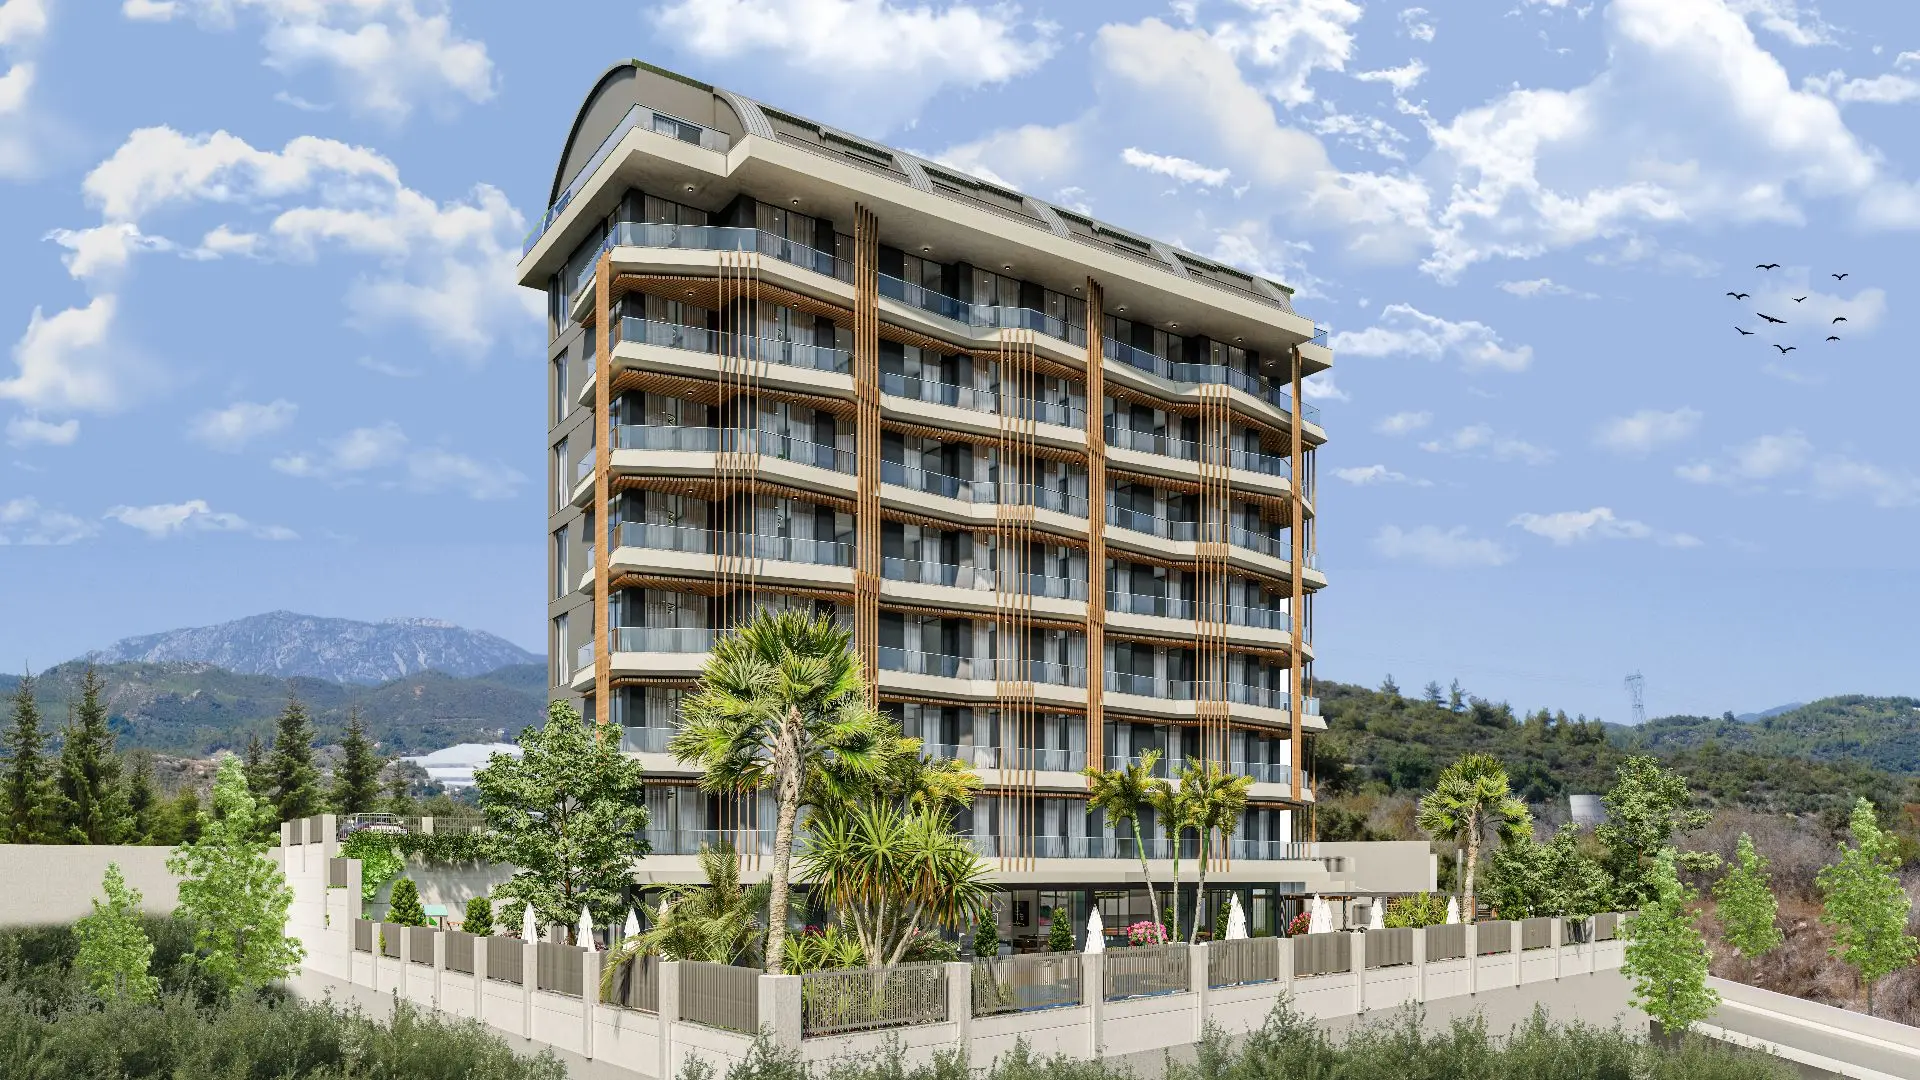 NEW RESIDENTIAL COMPLEX IN A DEVELOPING DISTRICT OF ALANYA, DEMIRTAŞ